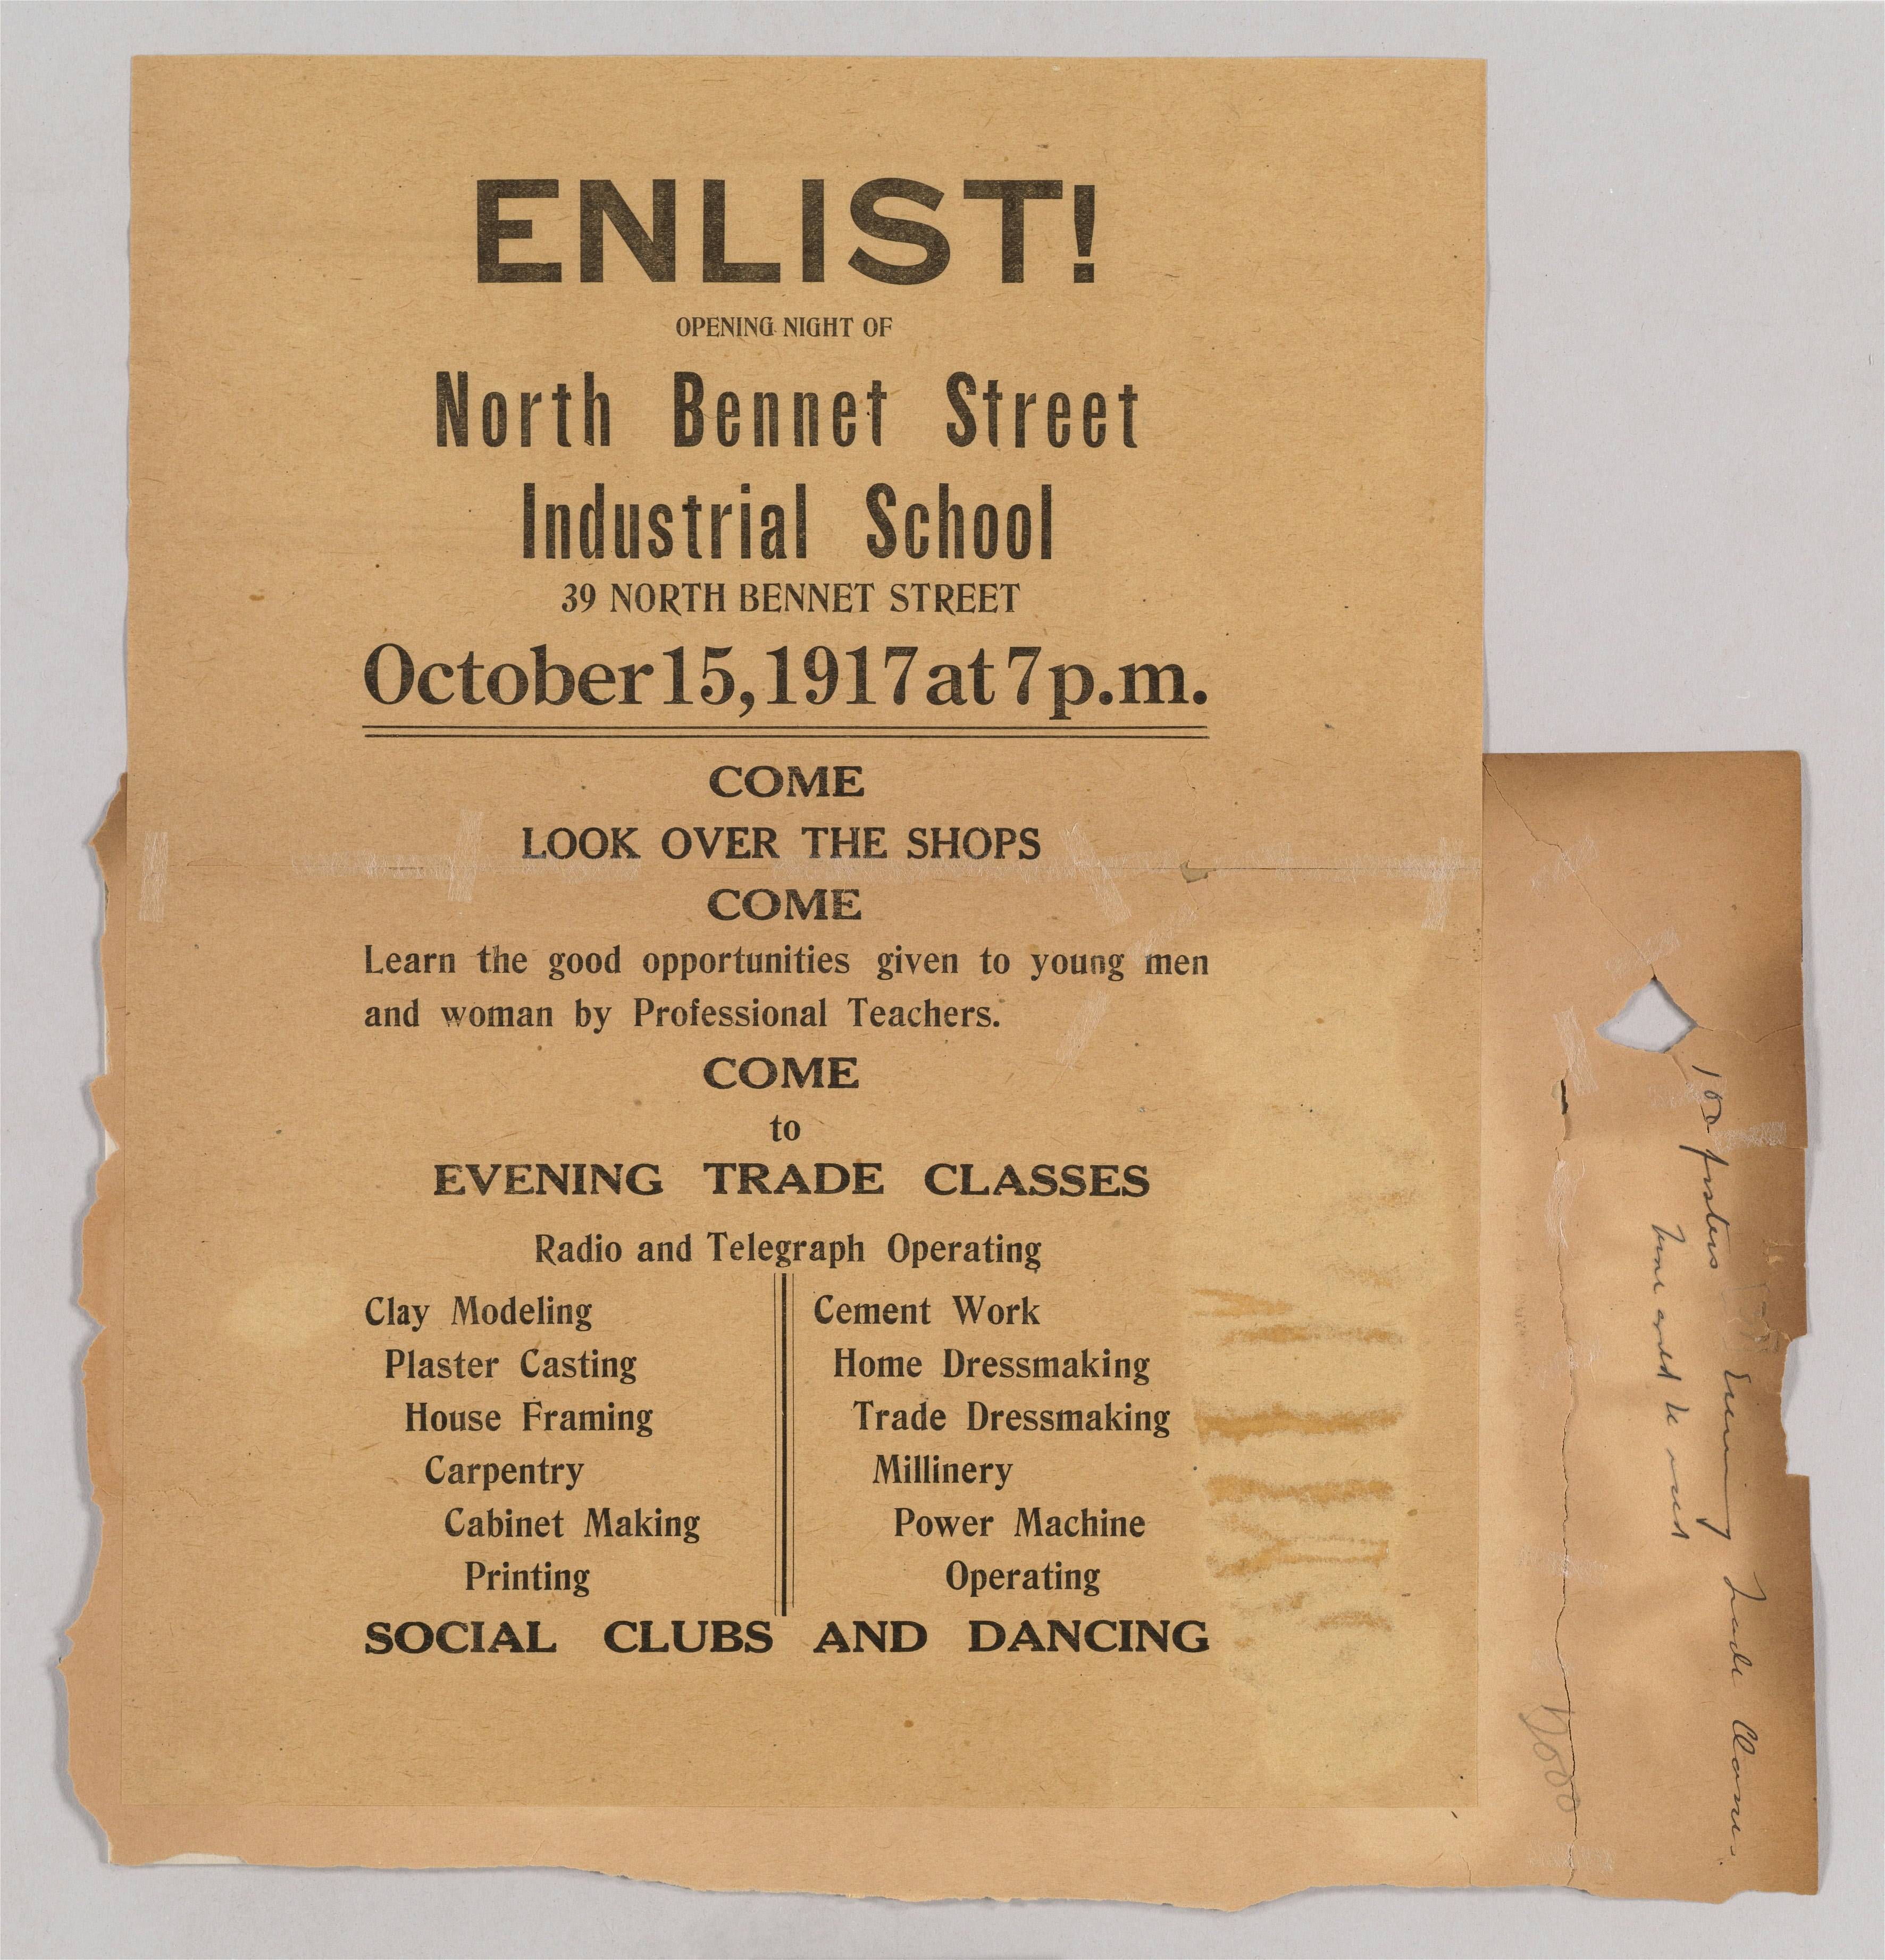 Records of North Bennet Street Industrial calling for people to come to the shops and evening trade classes